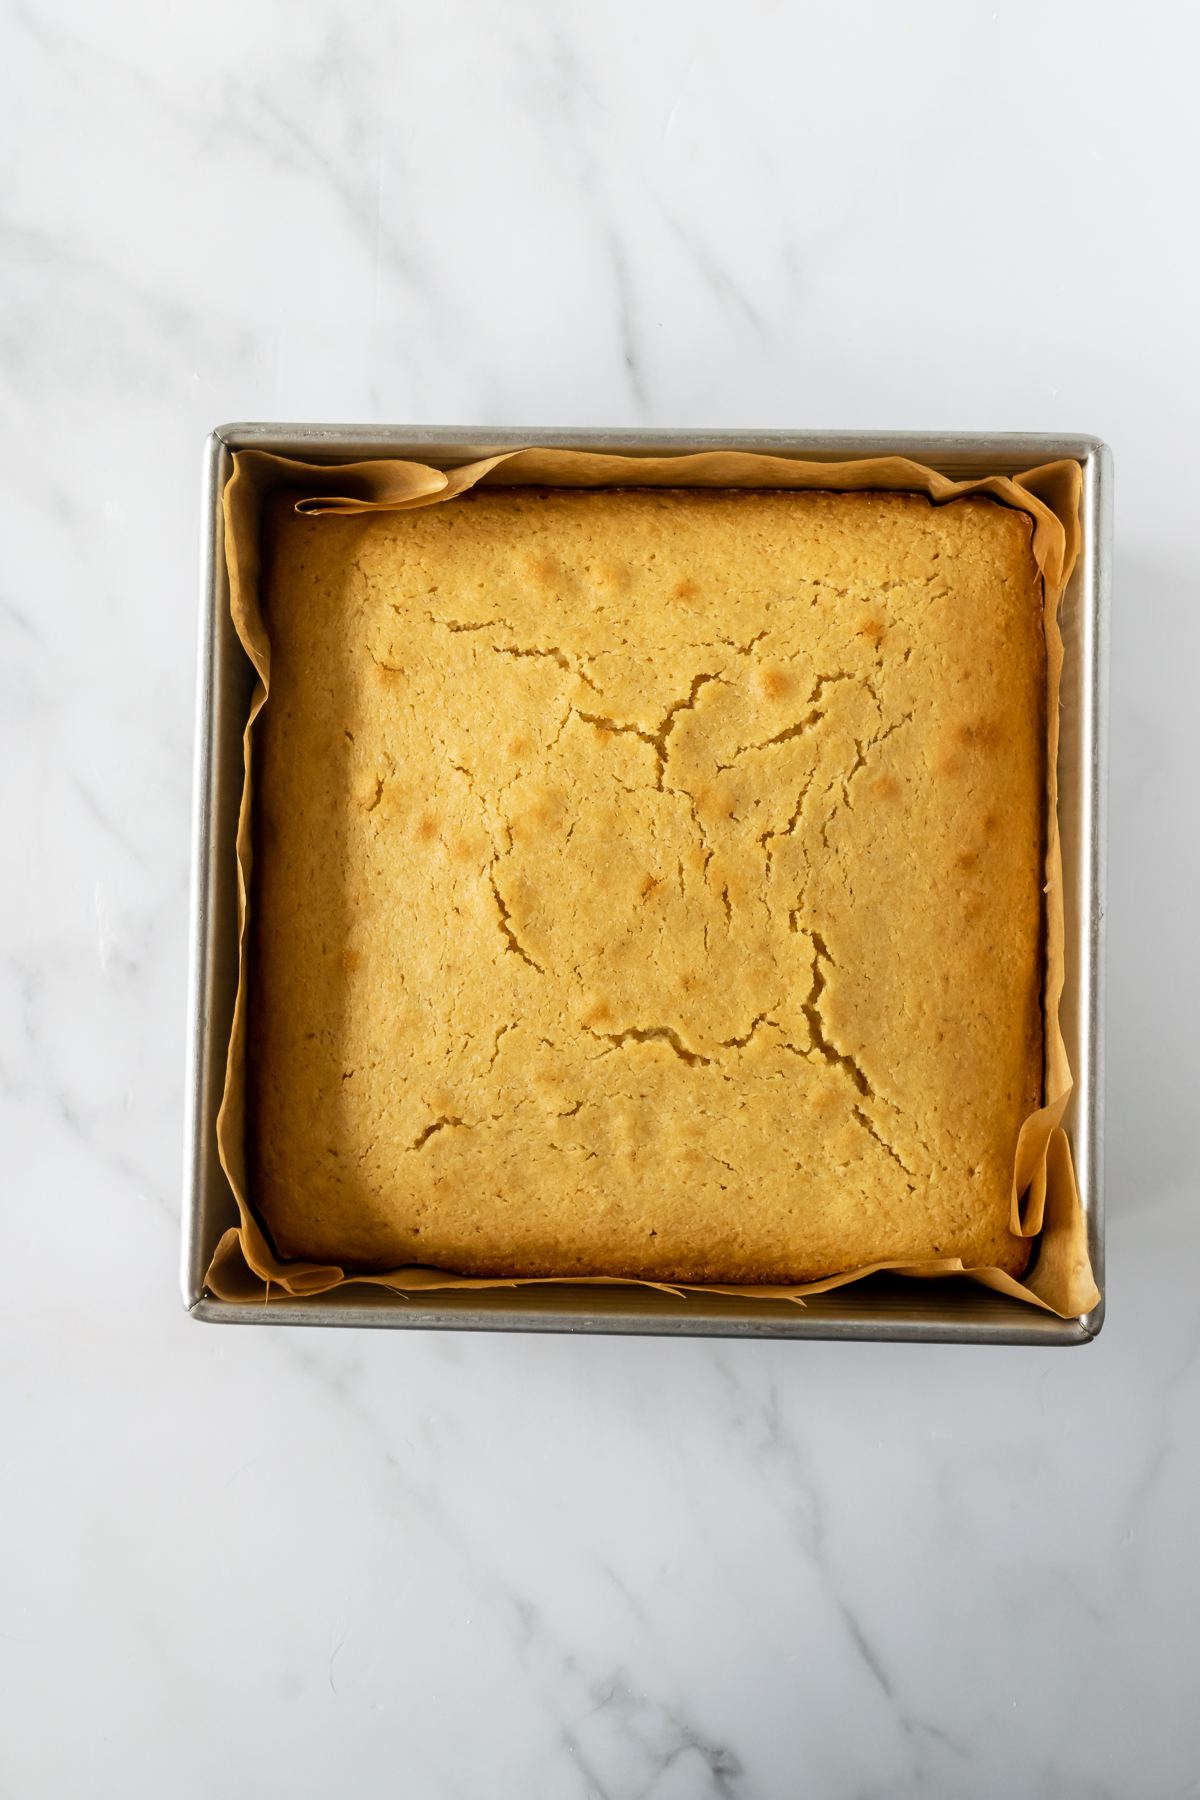 baked cornbread in a square baking pan on a white table.